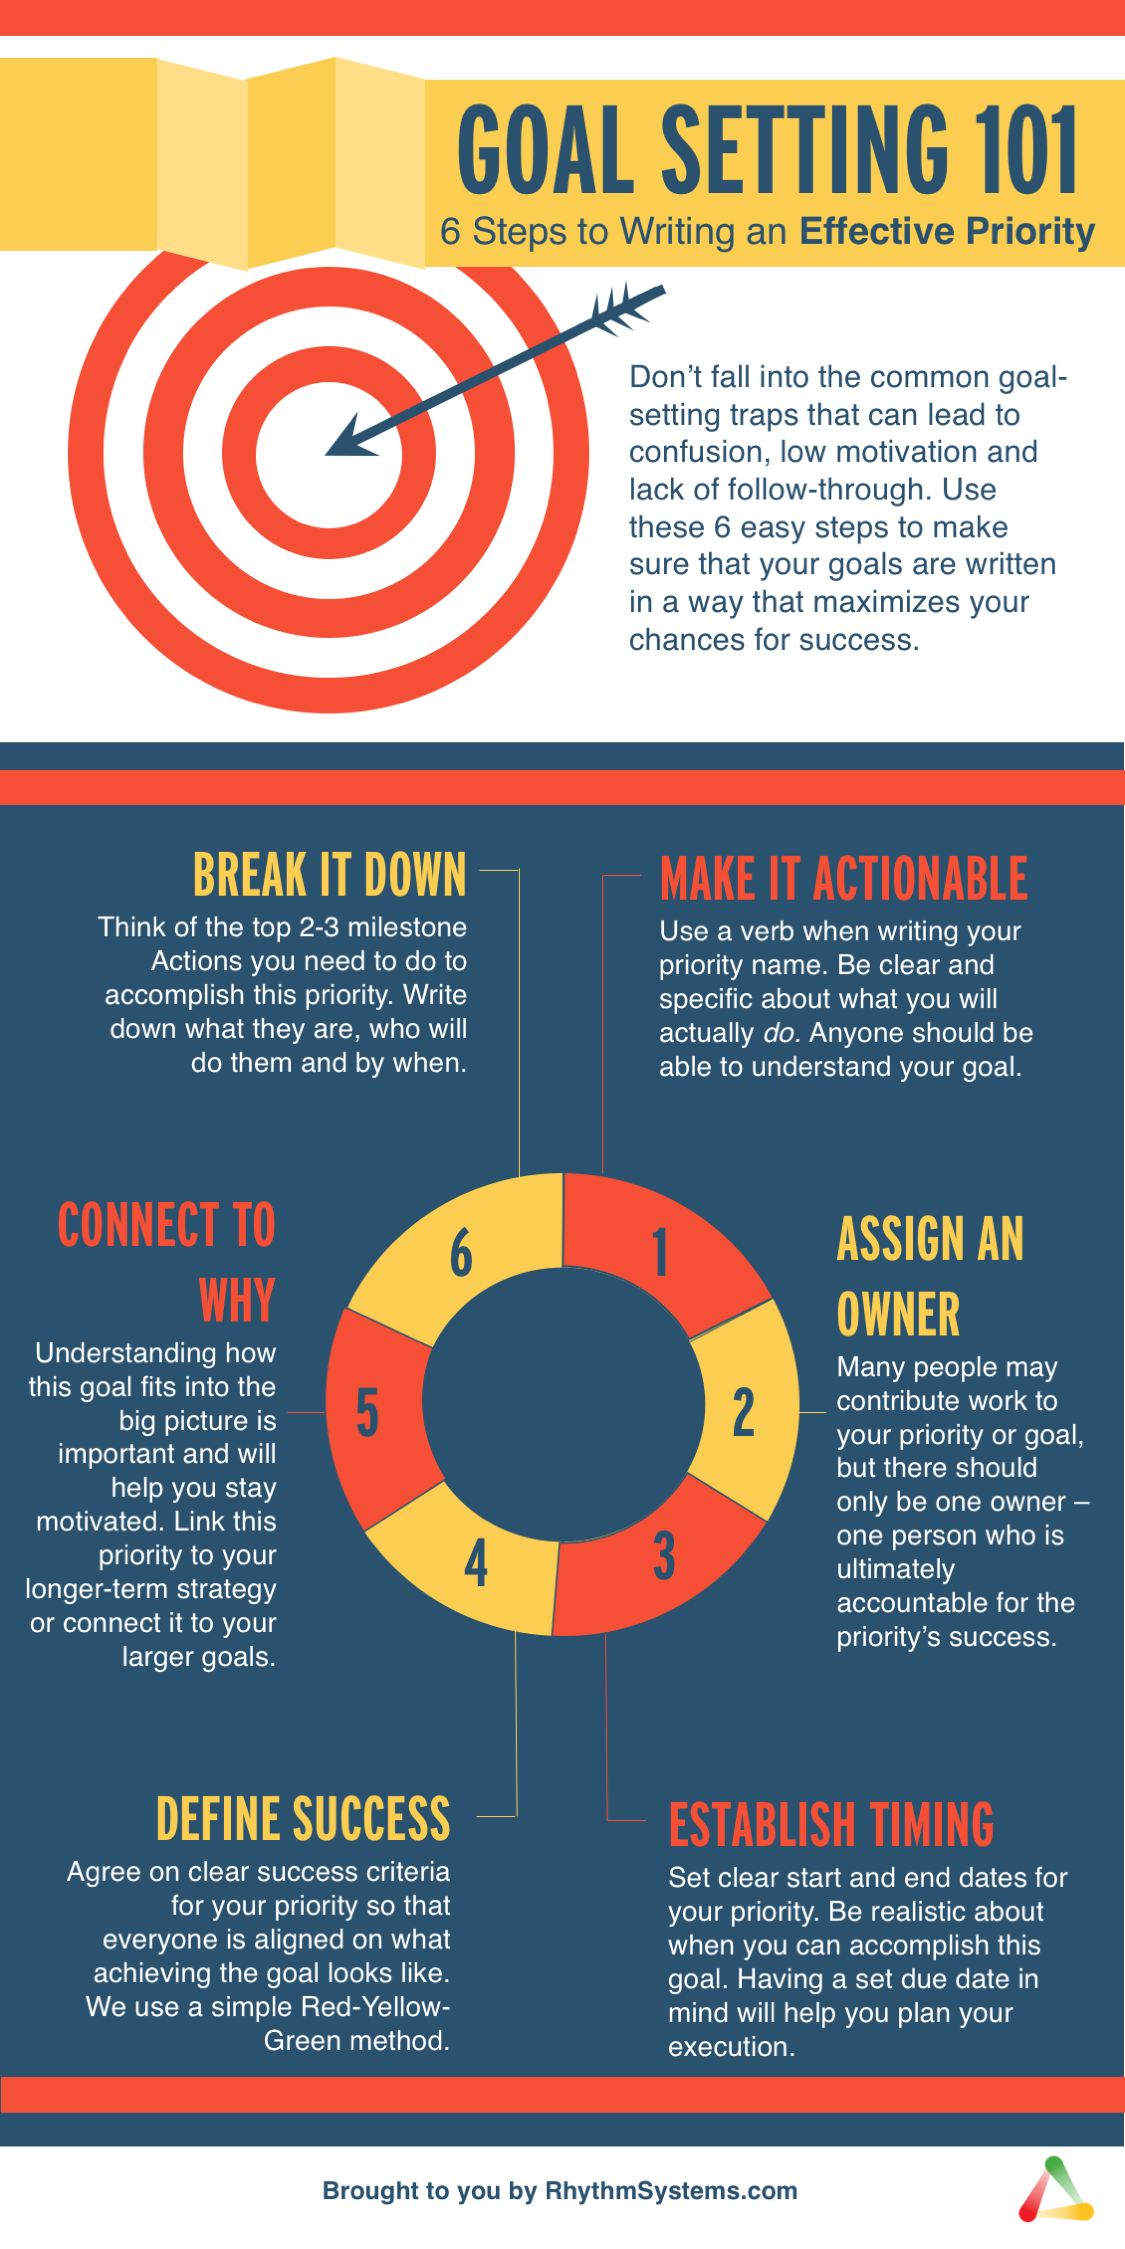 Effective Goal Setting 101 How to Write Effective Goals [Infographic]